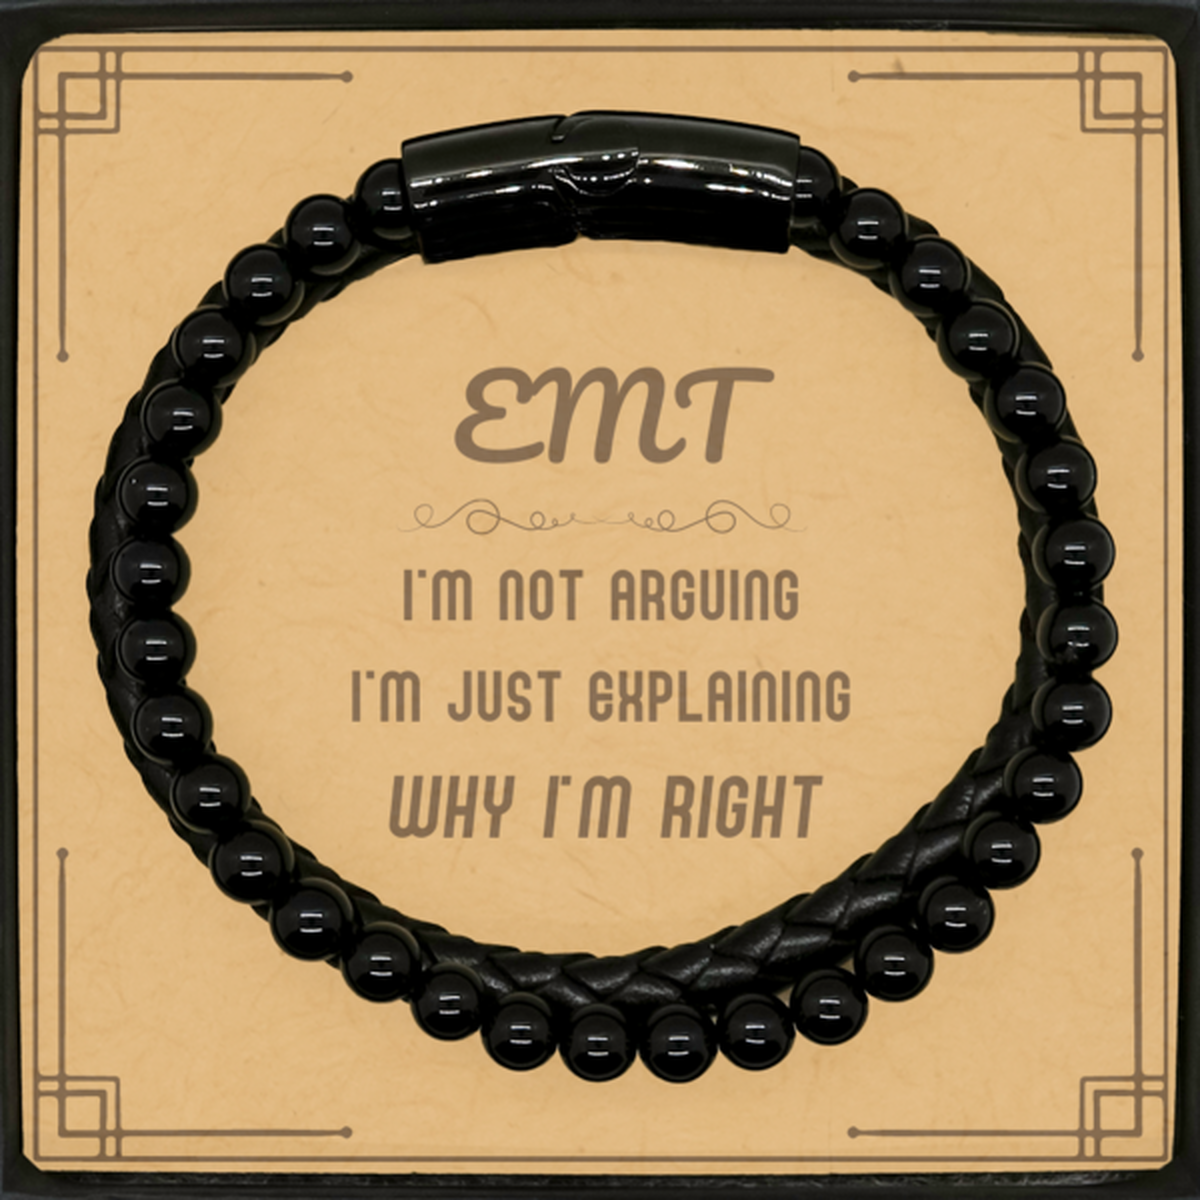 EMT I'm not Arguing. I'm Just Explaining Why I'm RIGHT Stone Leather Bracelets, Funny Saying Quote EMT Gifts For EMT Message Card Graduation Birthday Christmas Gifts for Men Women Coworker